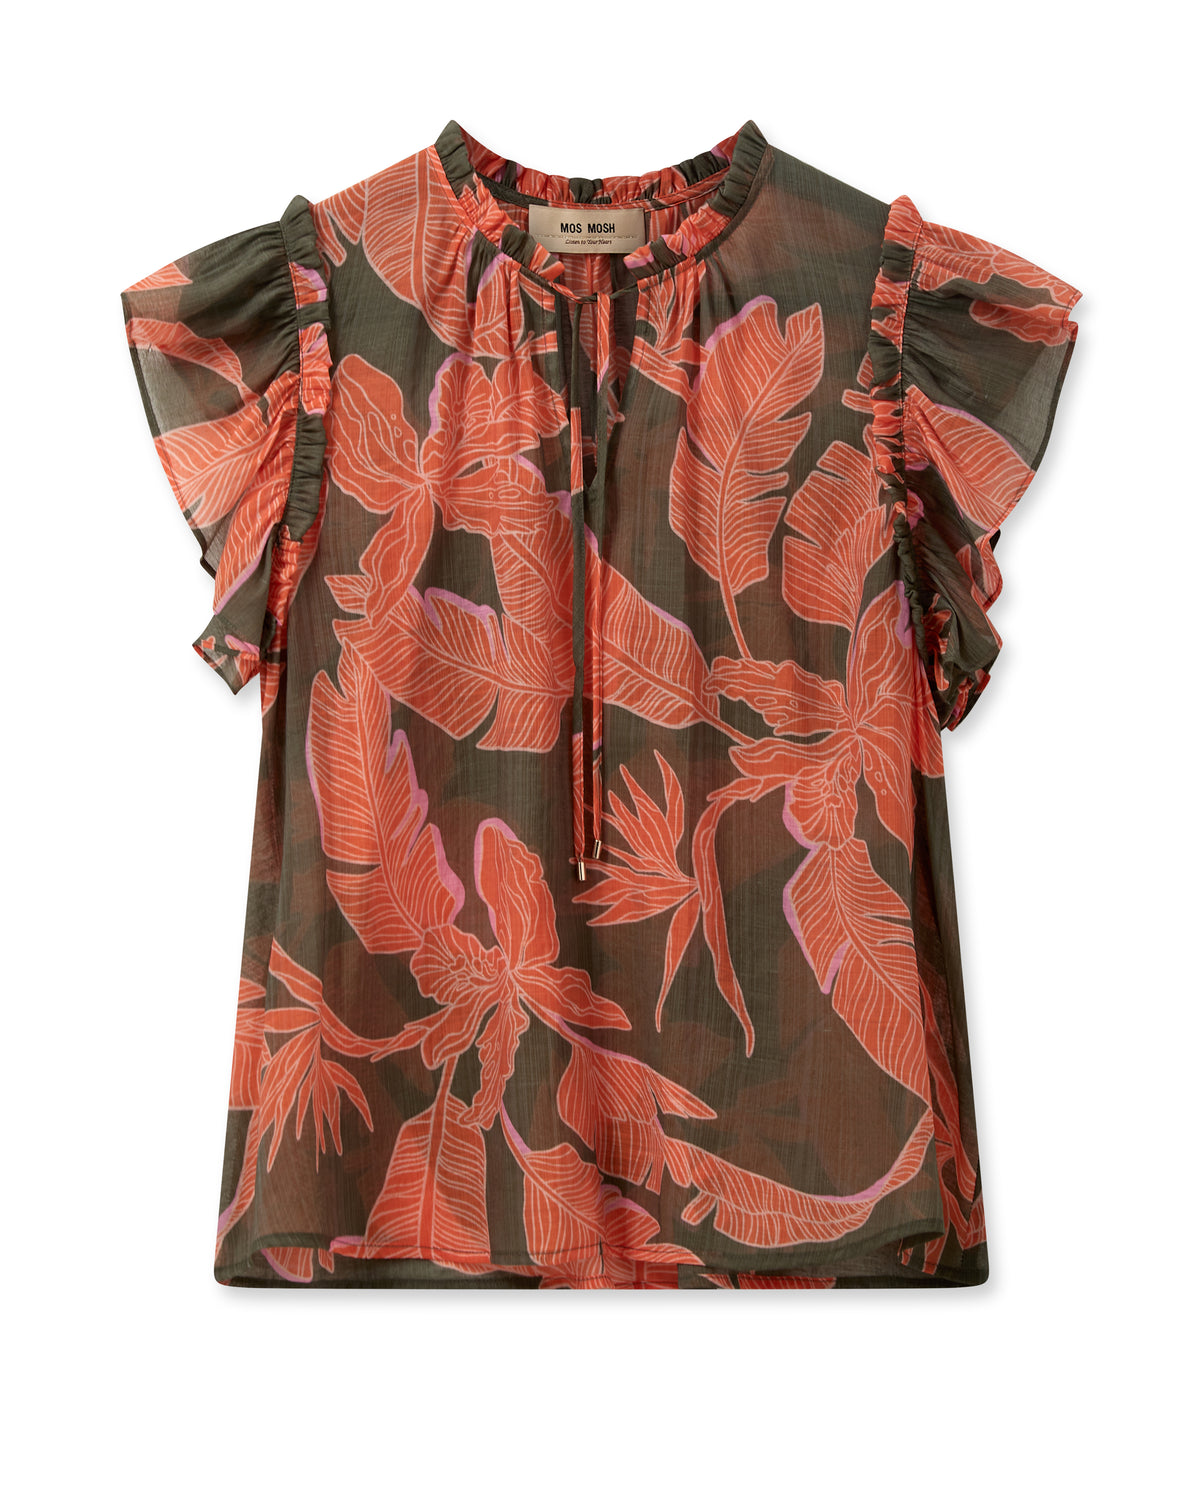 Printed viscose top with frill sleeves and tie detail at the neck